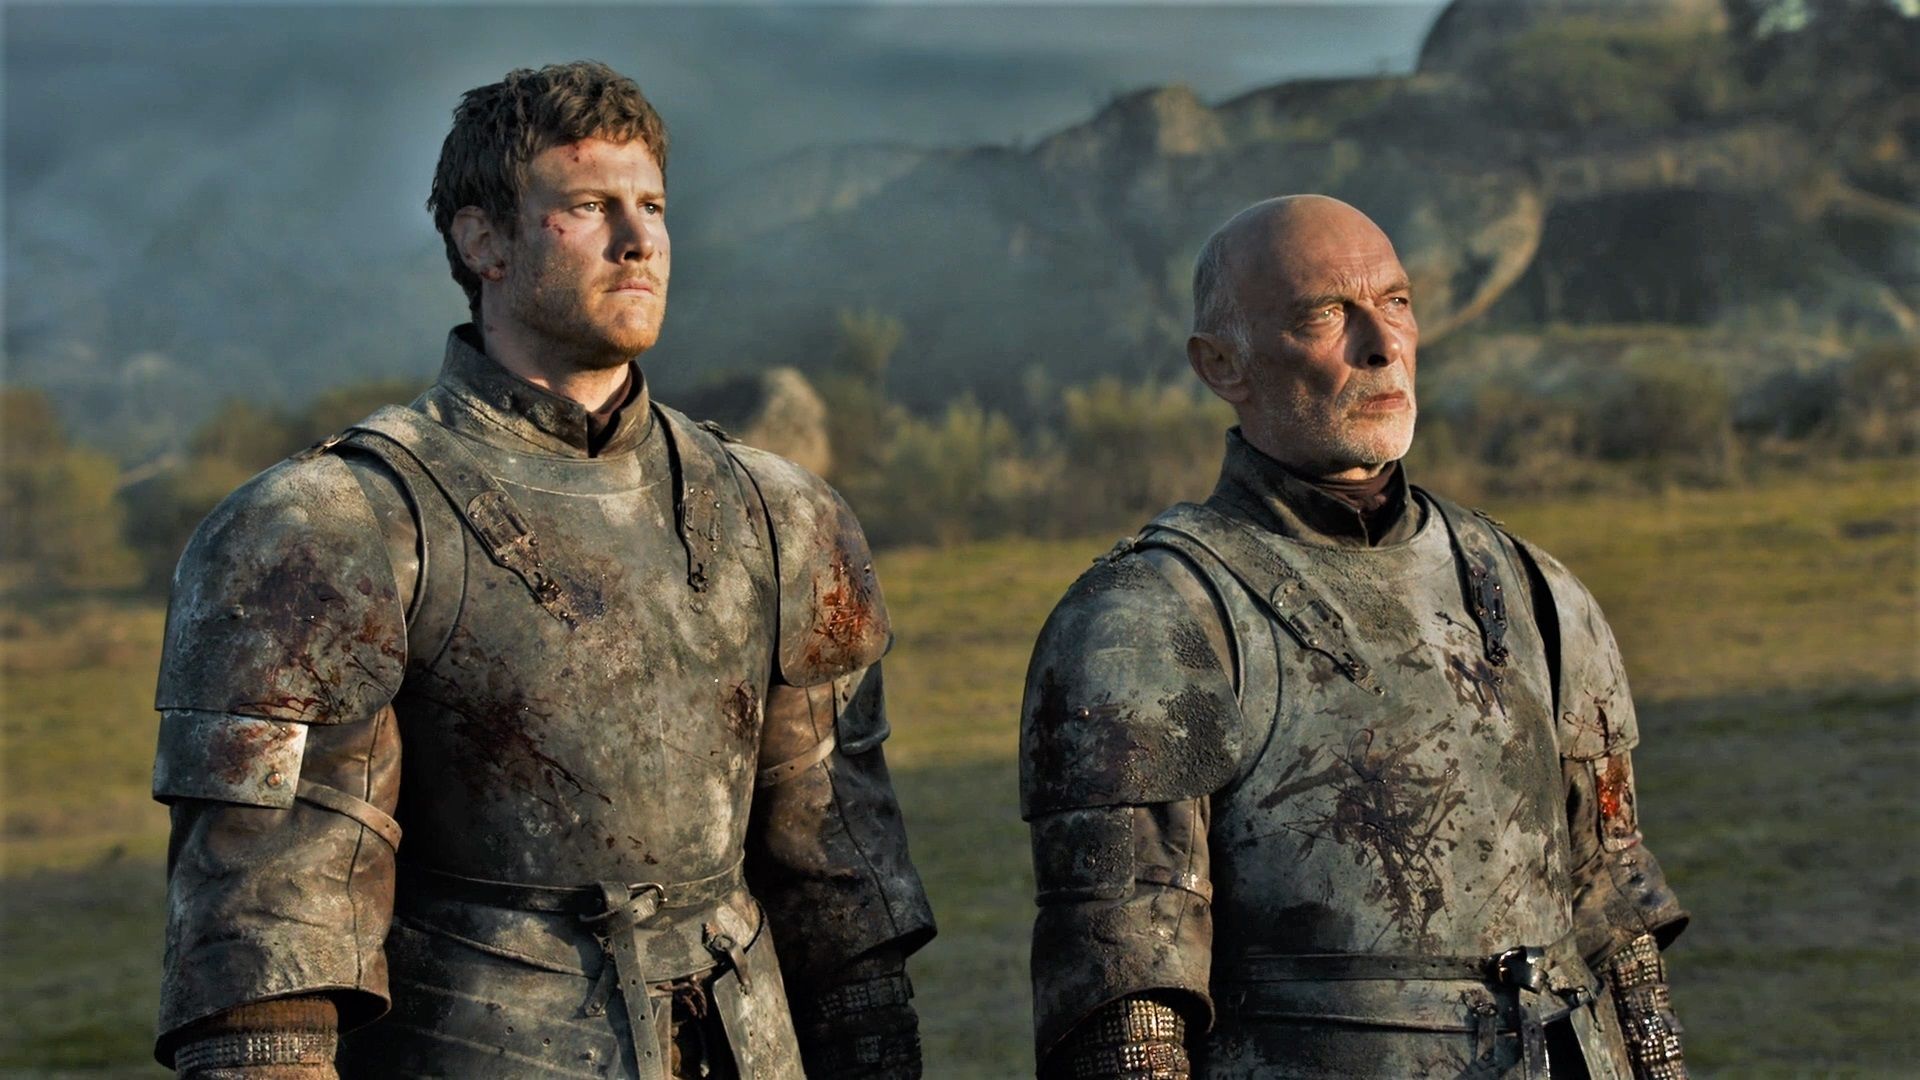 Lord Randyll and son Dickon are burned alive after refusing to bend the knee to Daenerys